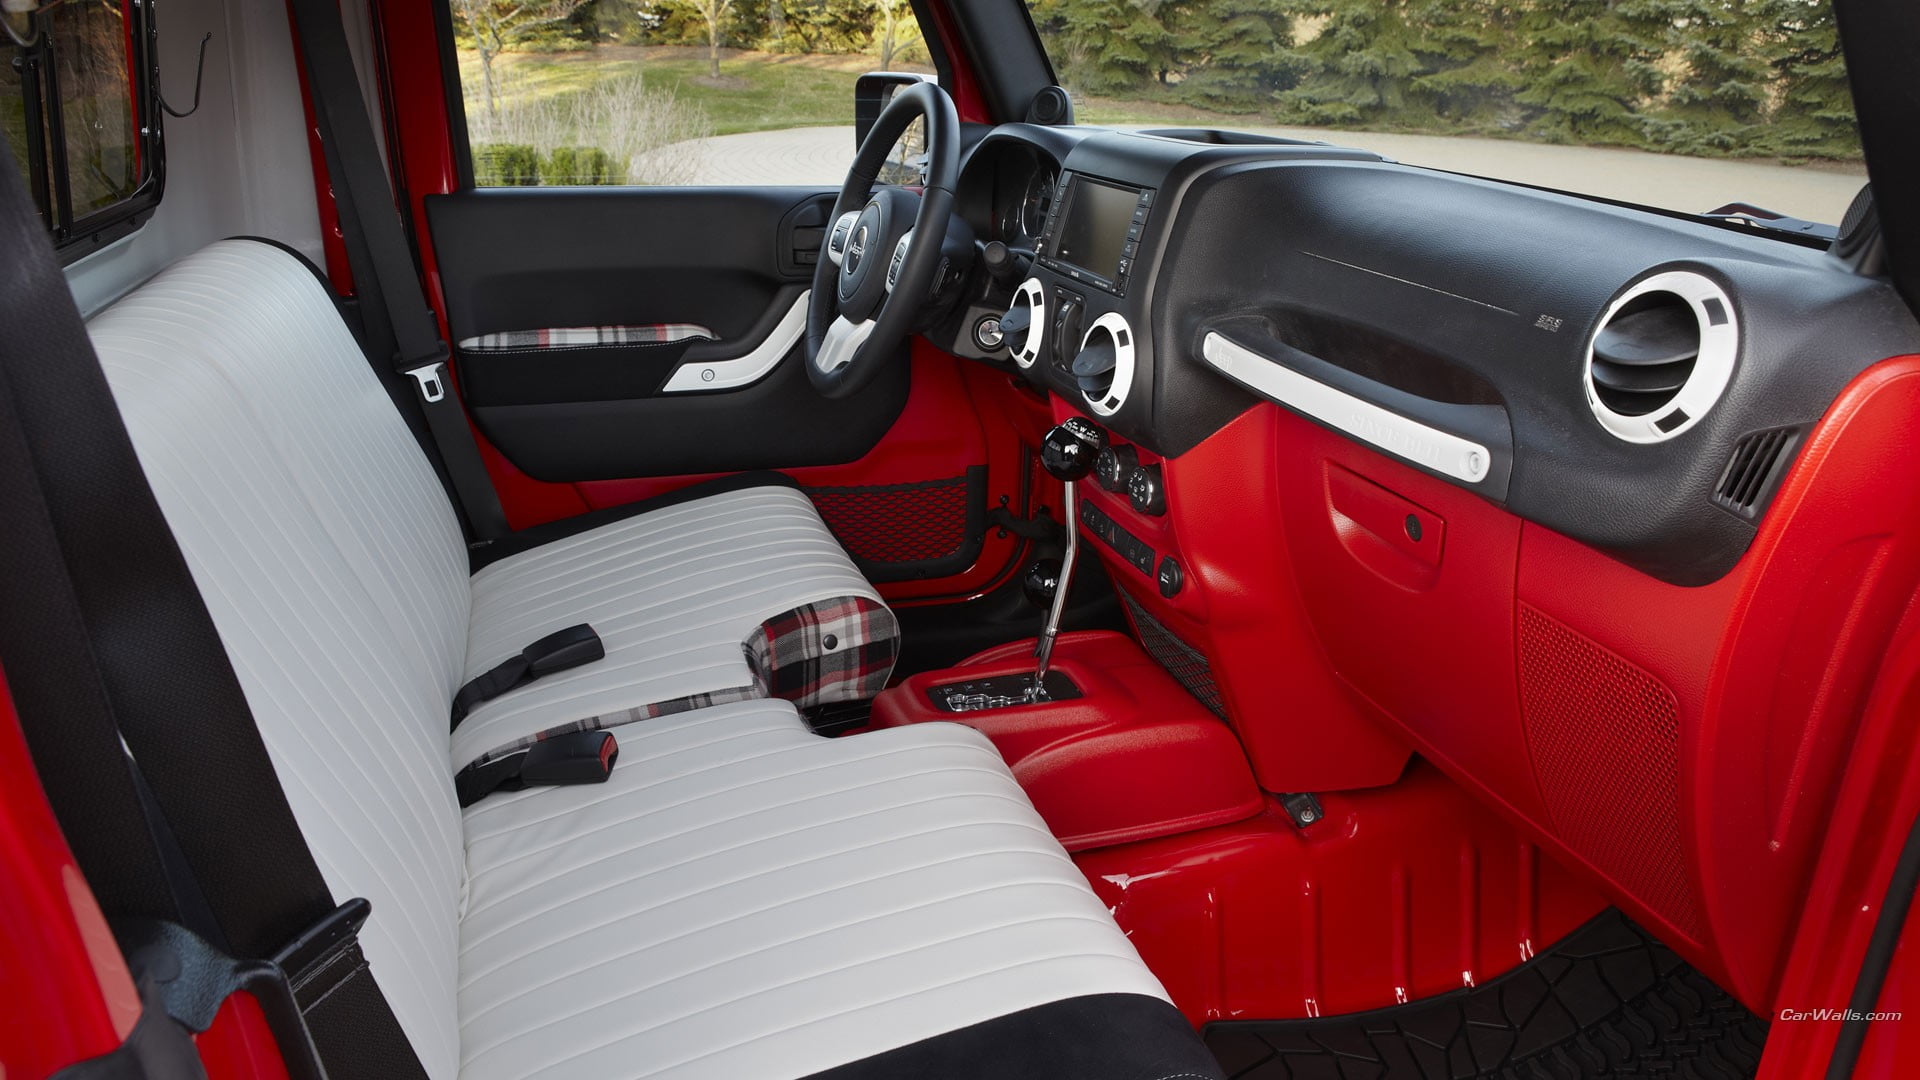 red and black vehicle interior, Jeep J-12, concept cars, car interior